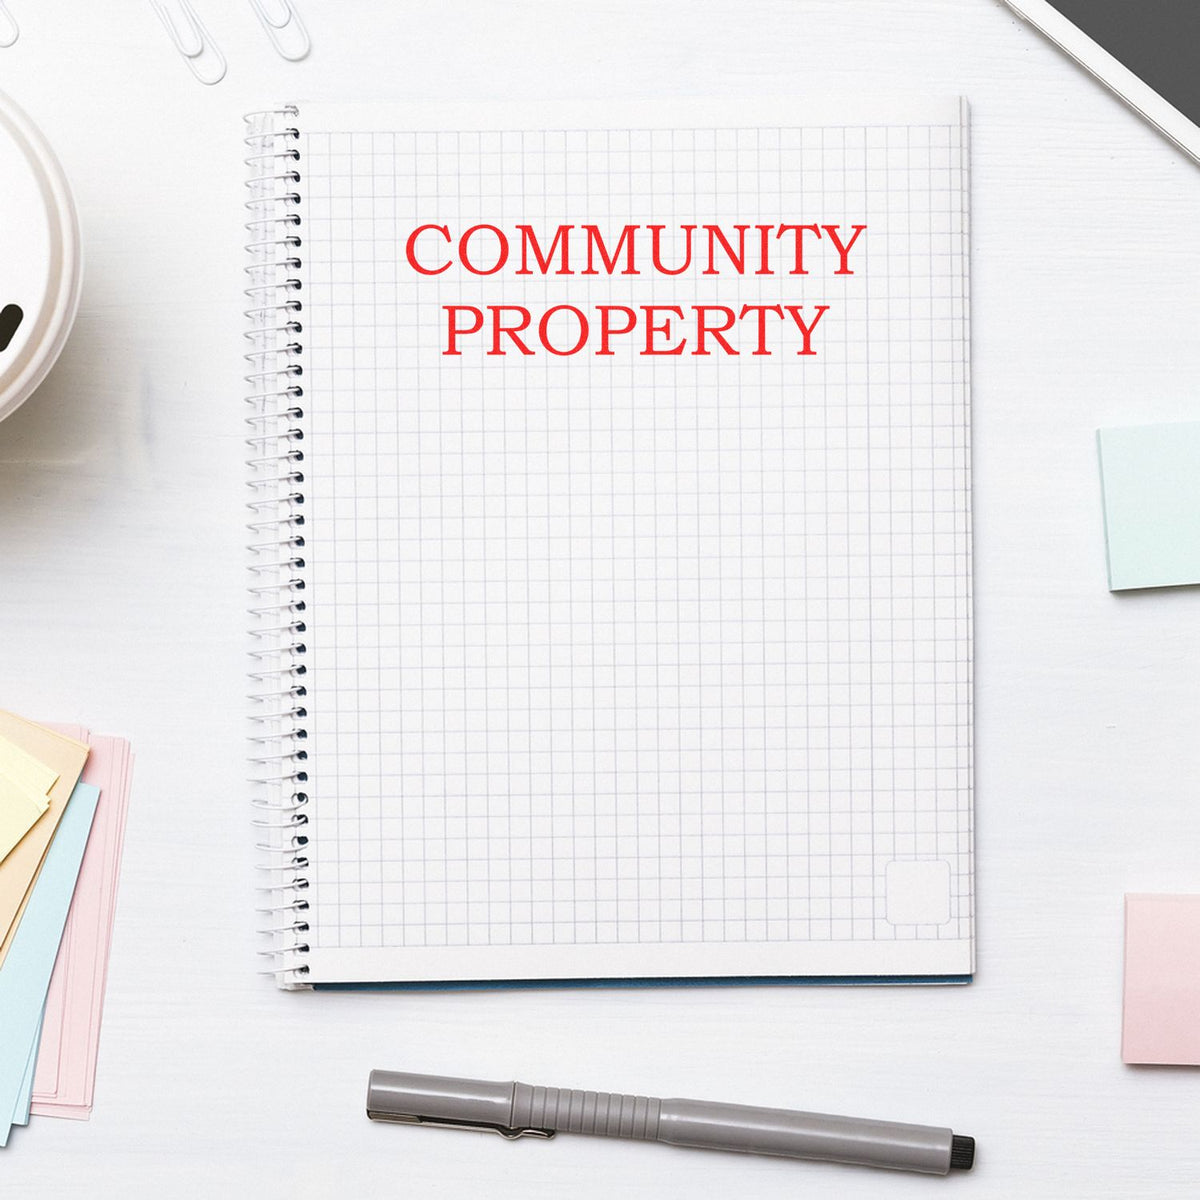 Large Community Property Rubber Stamp In Use Photo